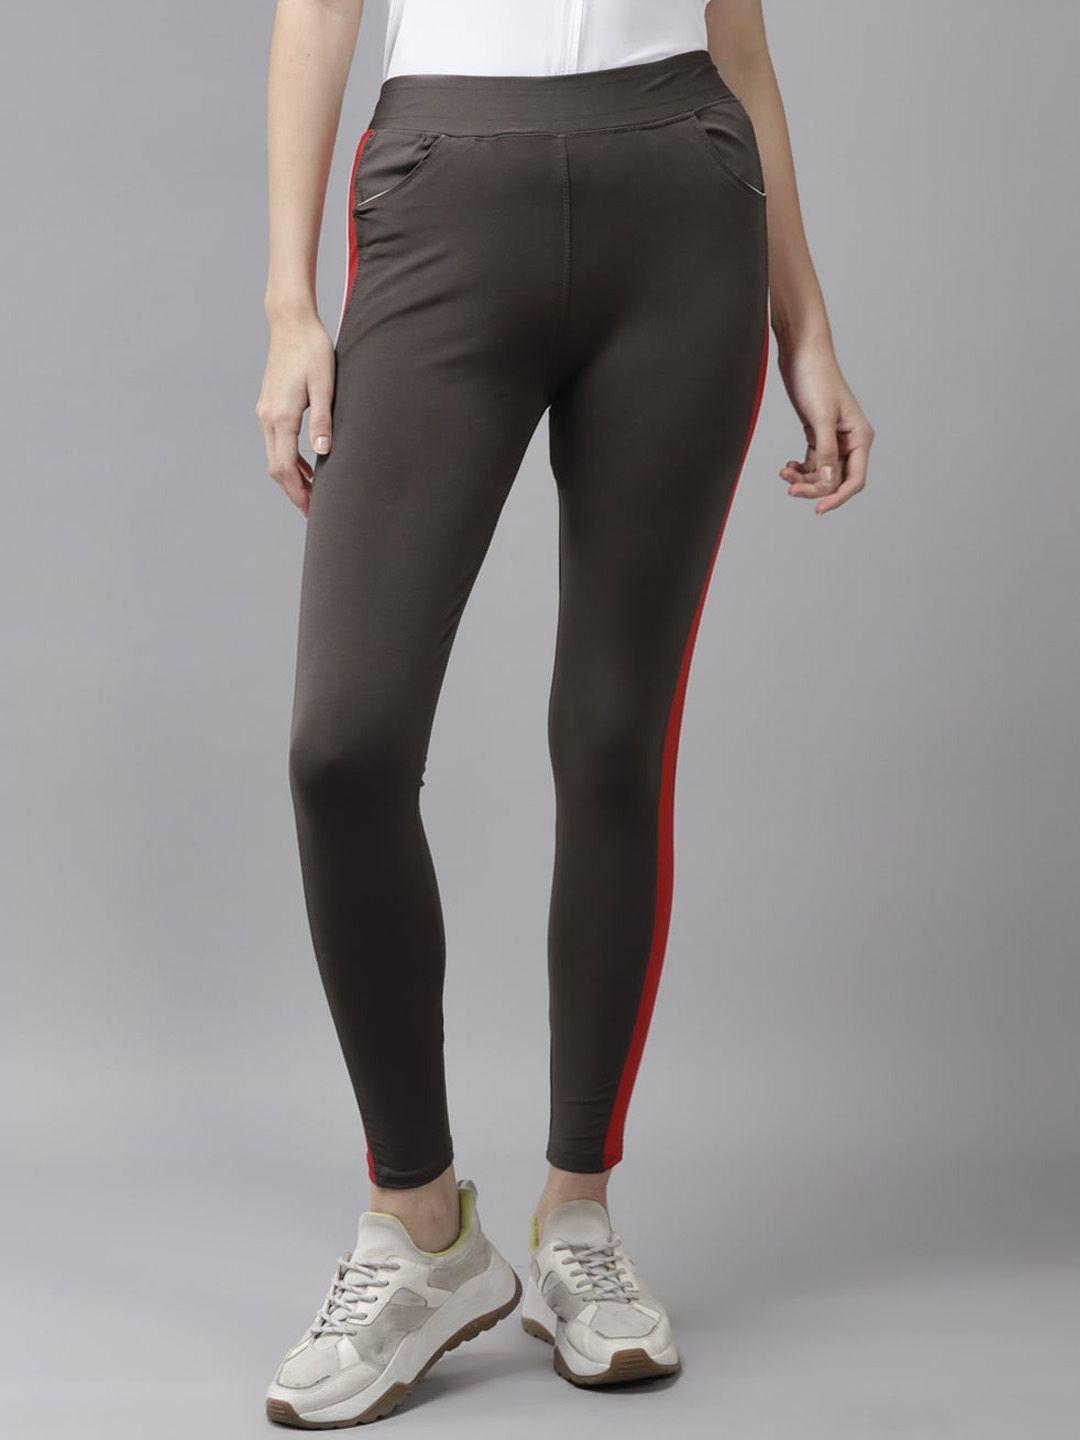 baesd-women-relaxed-fit-mid-rise-track-pants